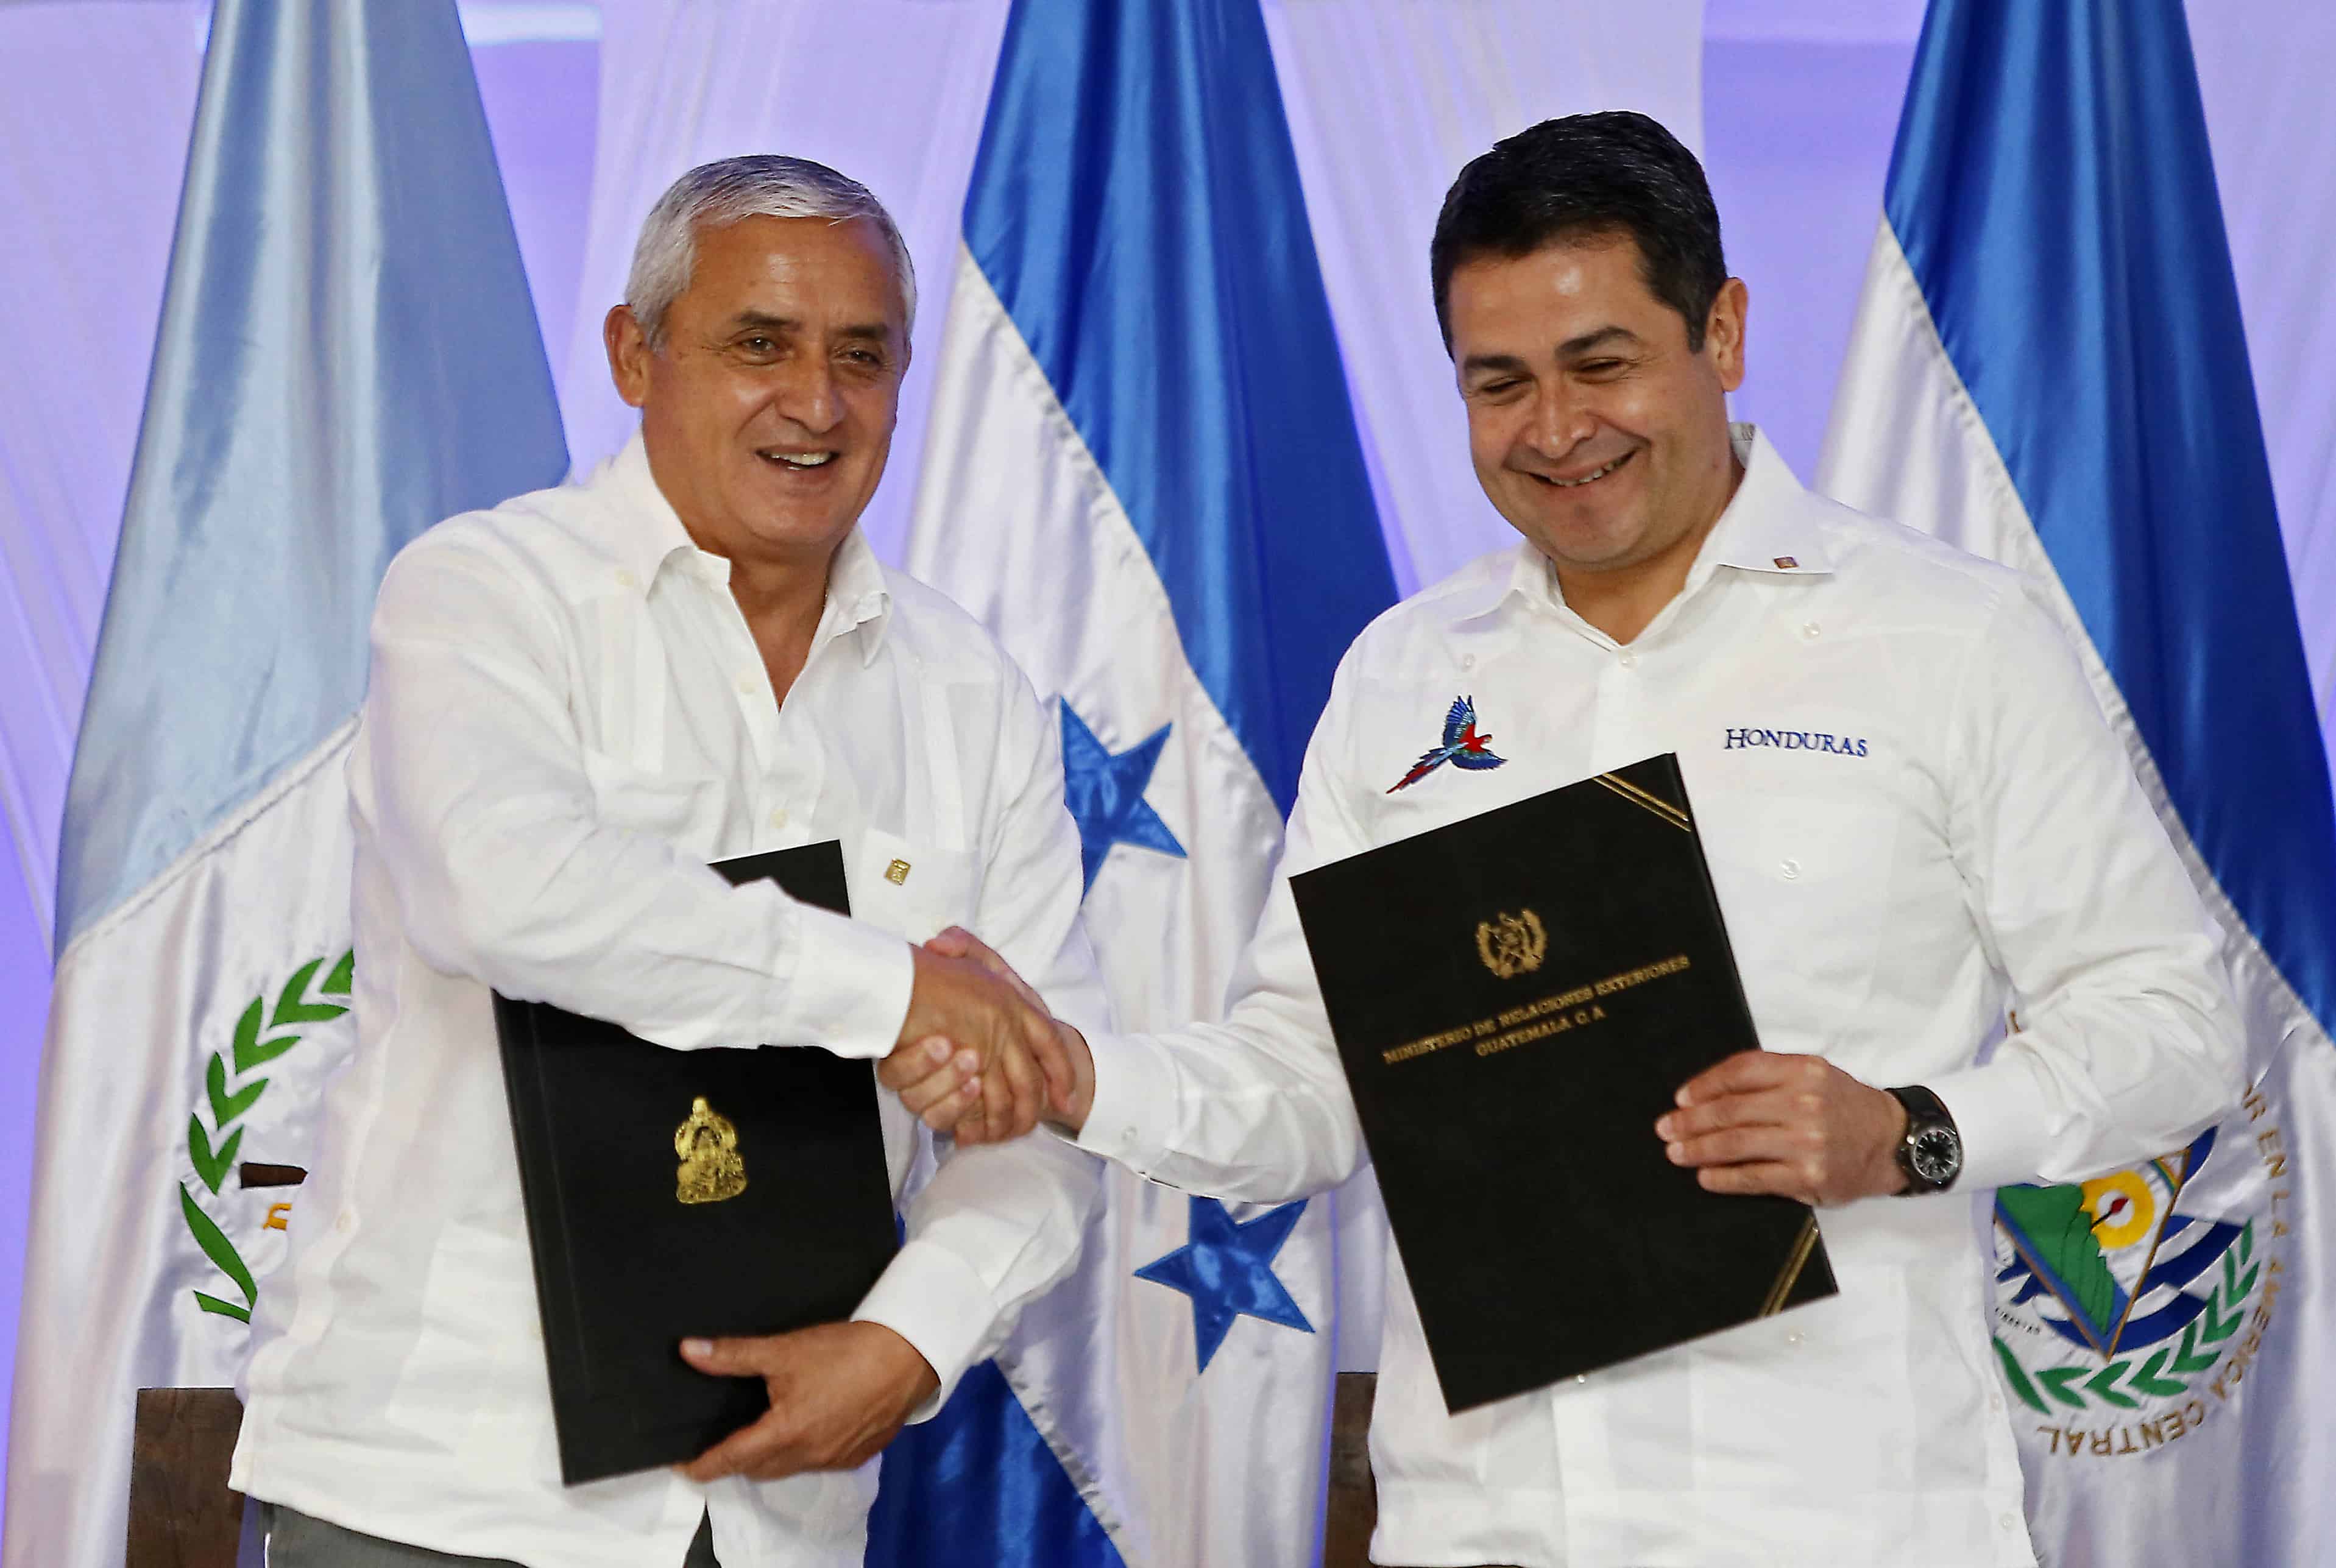 Honduran President Juan Orlando Hernandez (R) and his Guatemalan counterpart Otto Perez Molina as they shake hands after signing an intention letter of customs union during the first meeting of the Alliance for Prosperity of the North Triangle in Tela, Feb. 26, 2015.